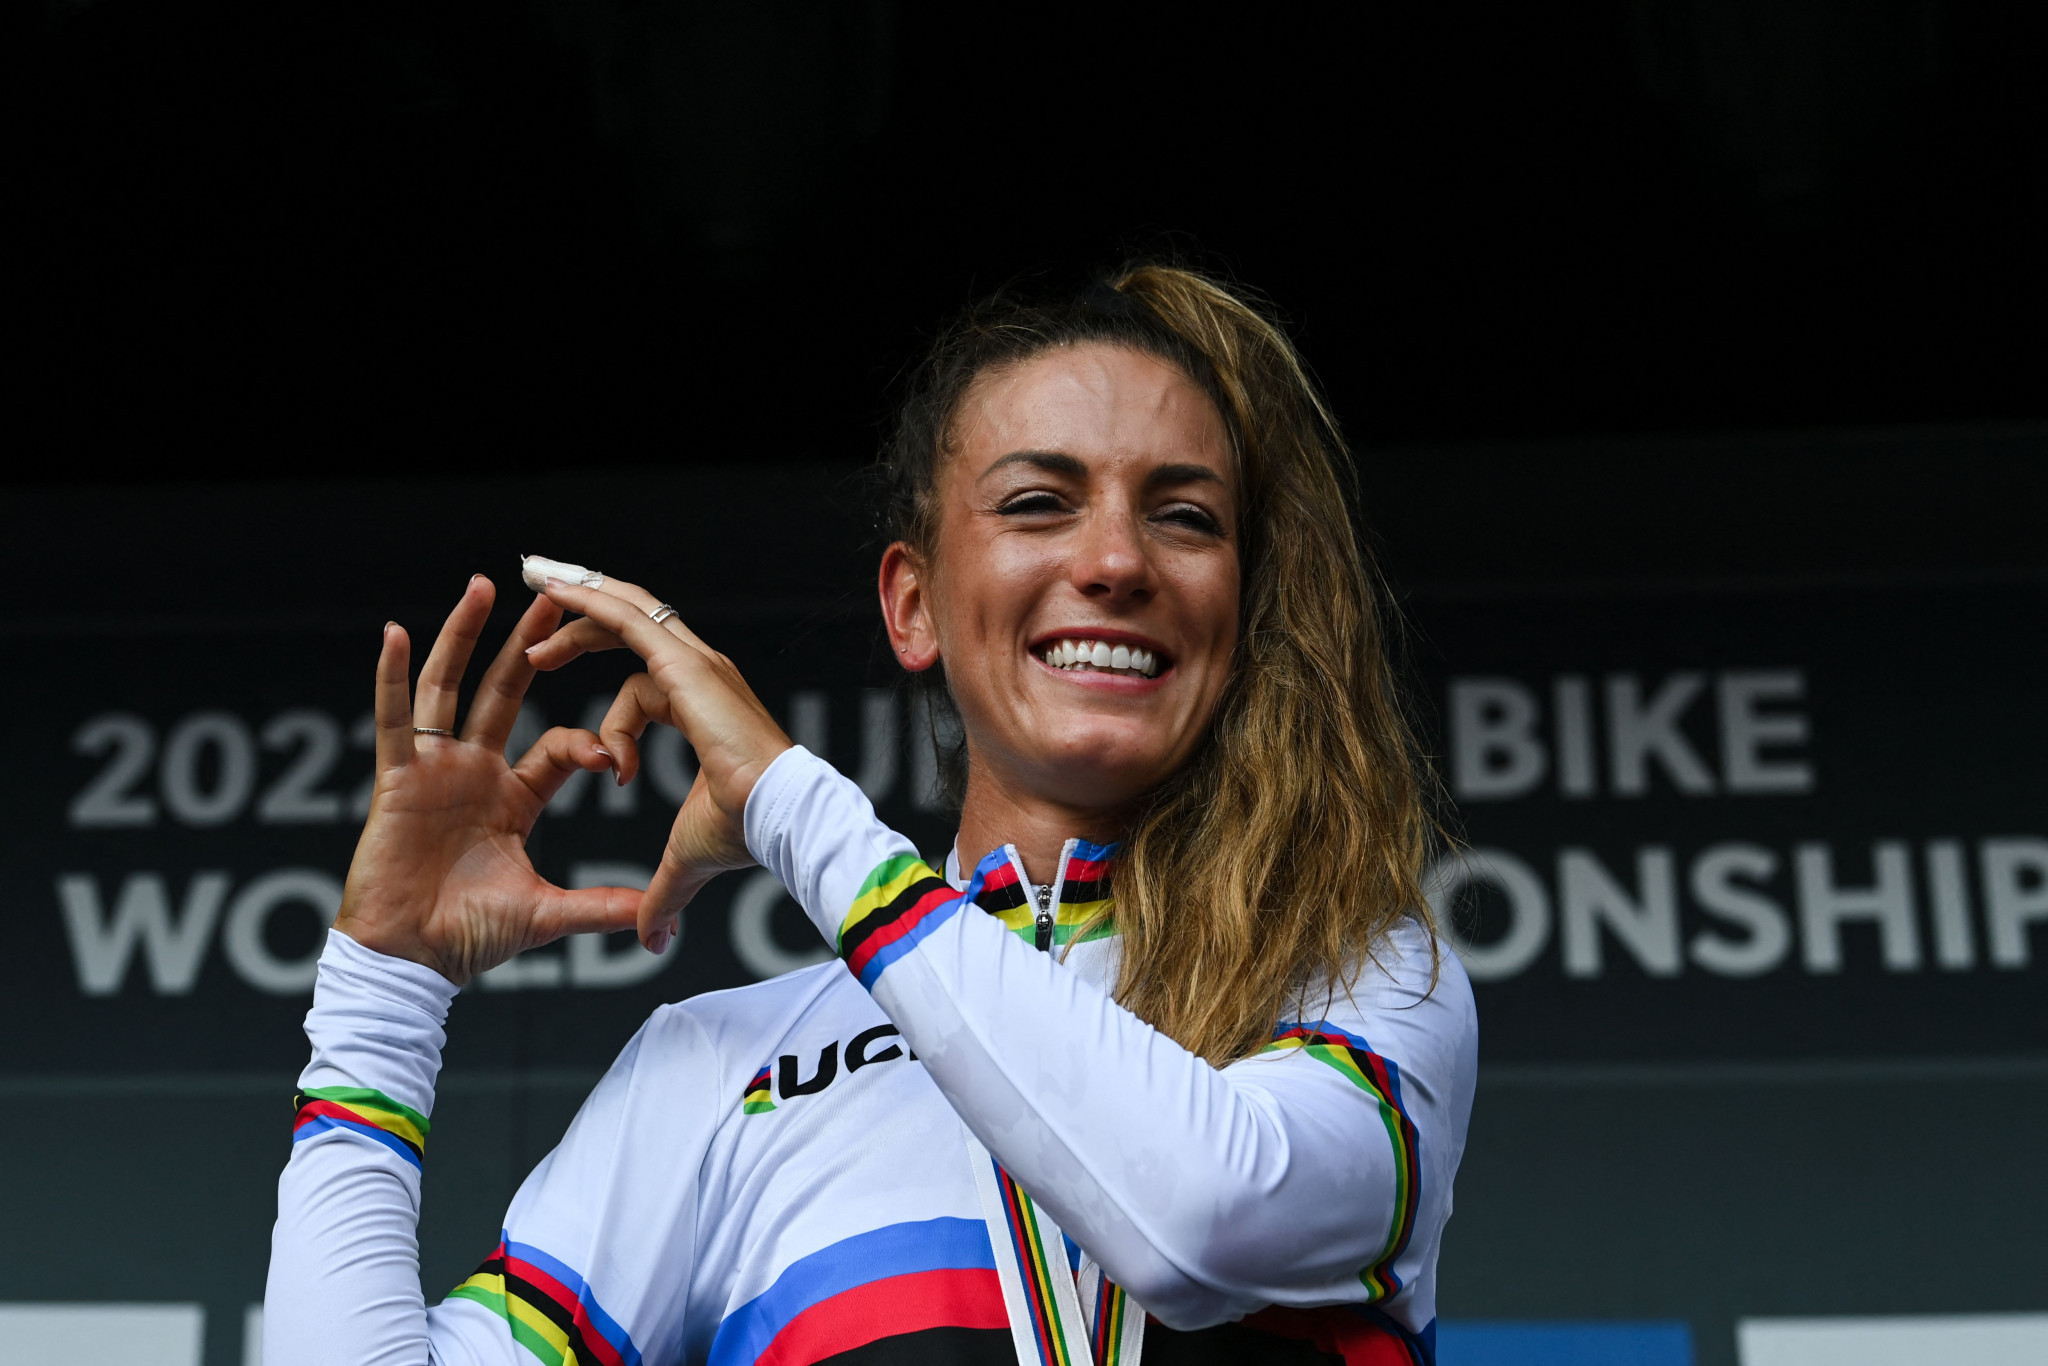 Ferrand-Prevot claims historic fourth title on final day at UCI Mountain Bike World Championships